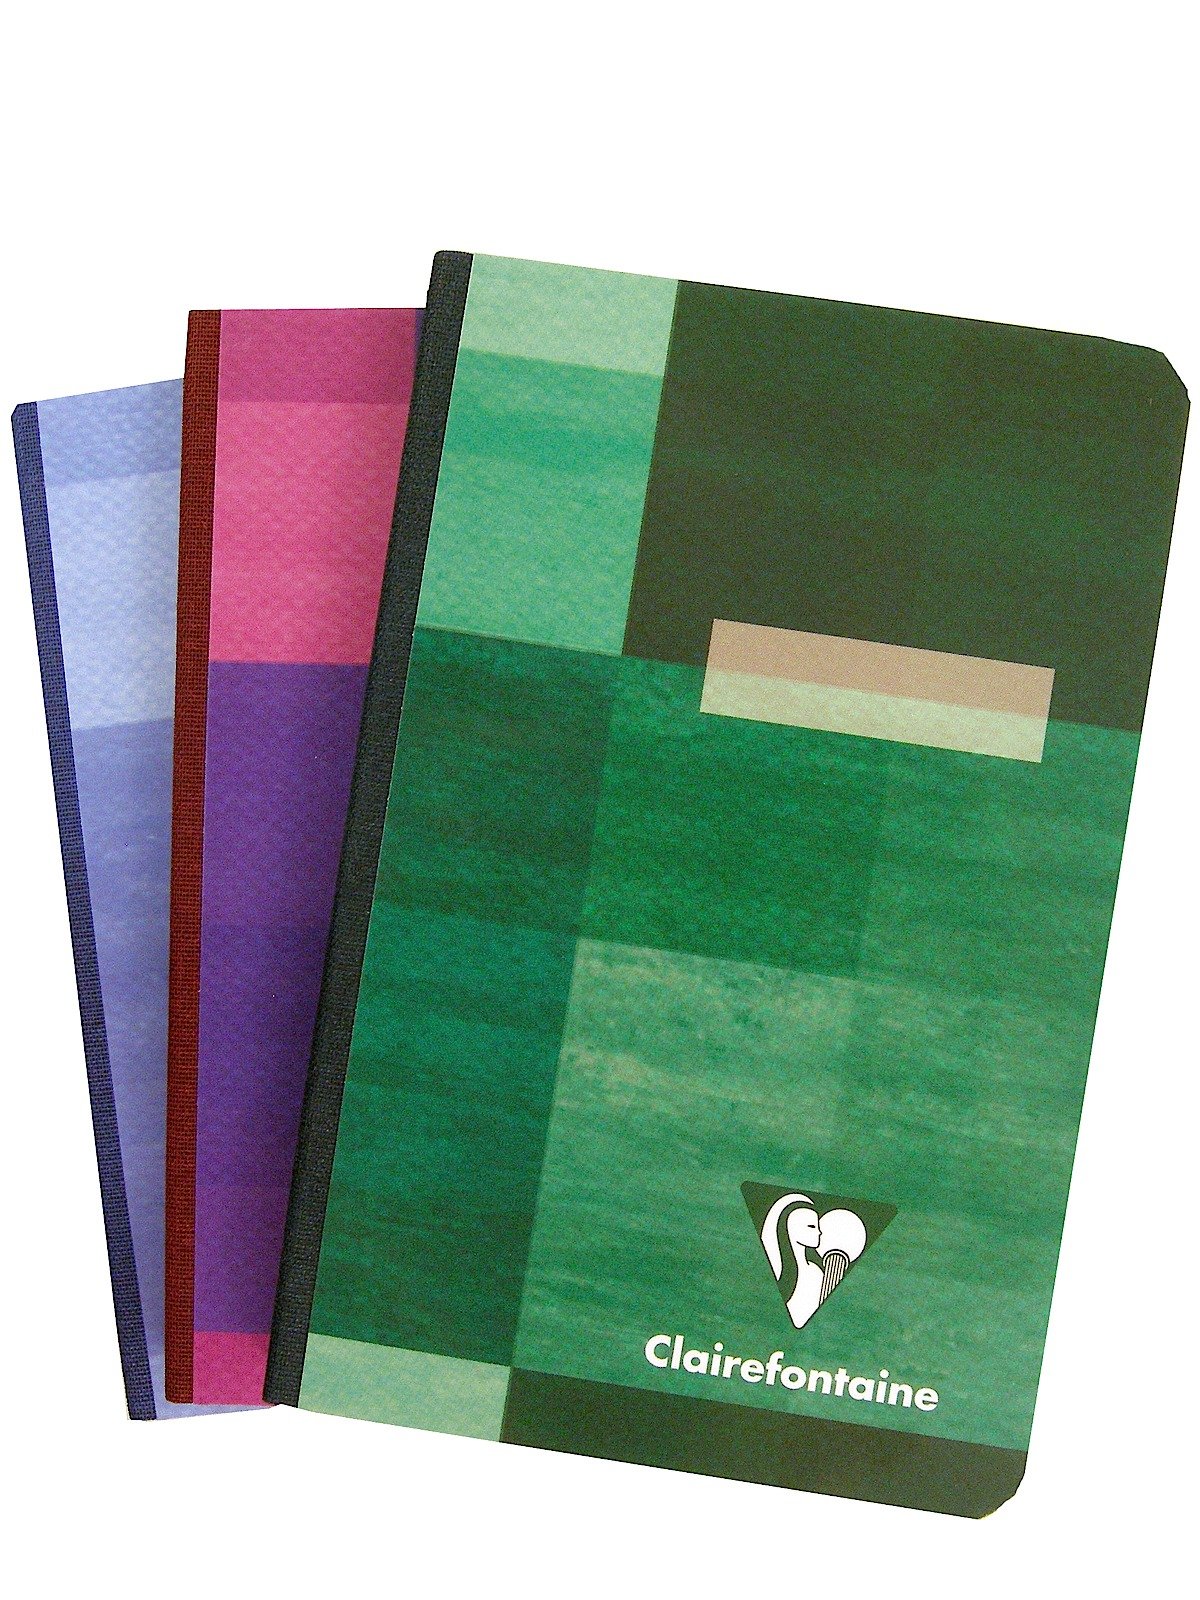 Clairefontaine - Cloth-bound Notebooks